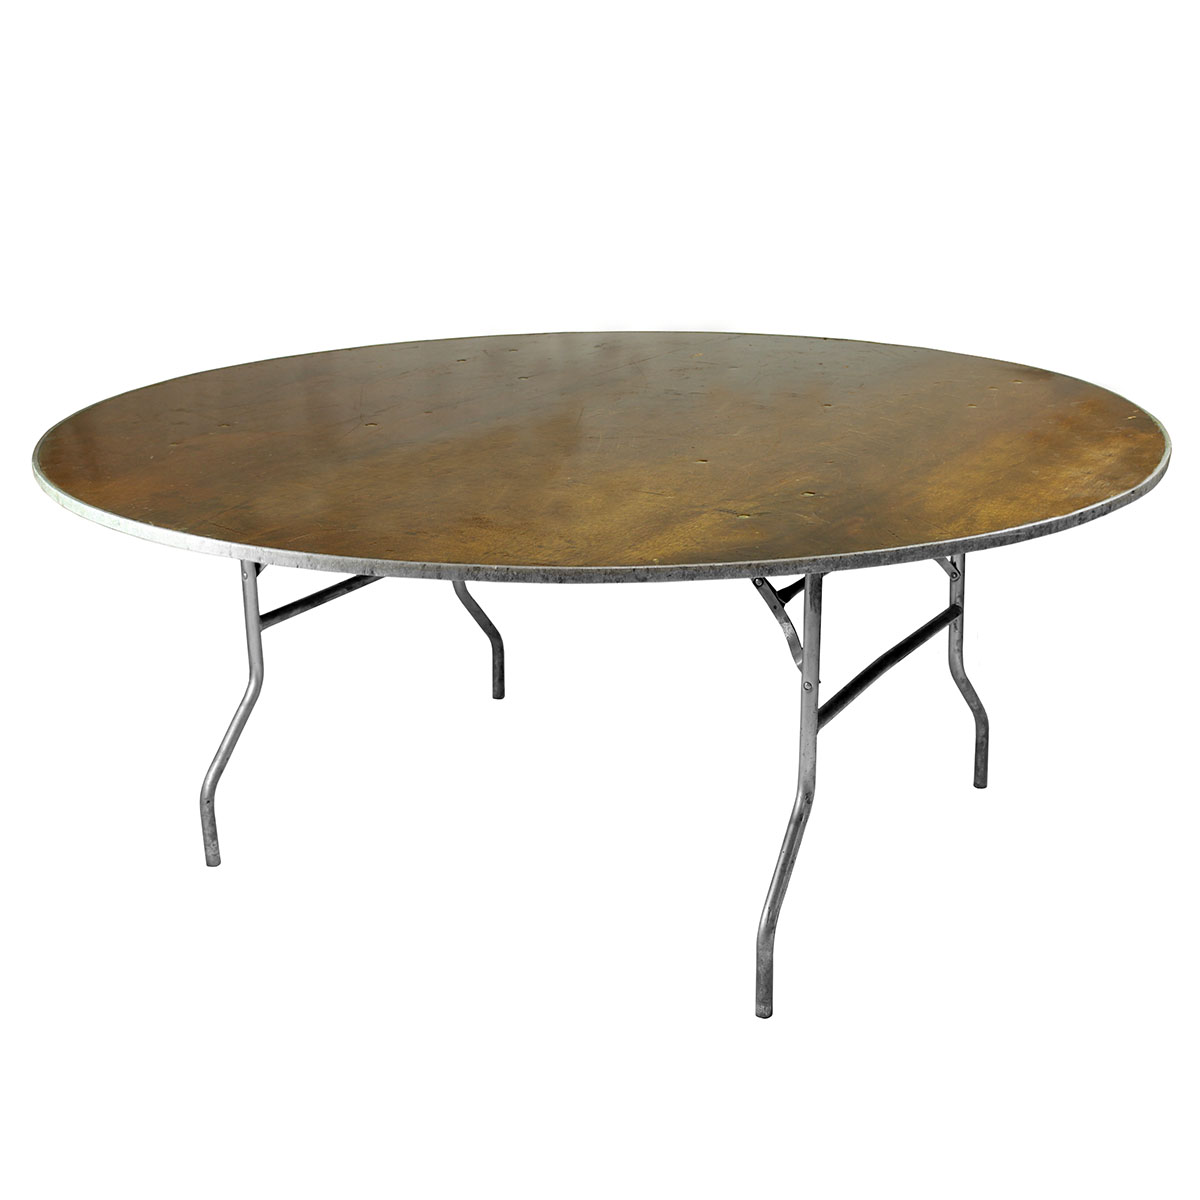 Table 72" Round Wood Topped